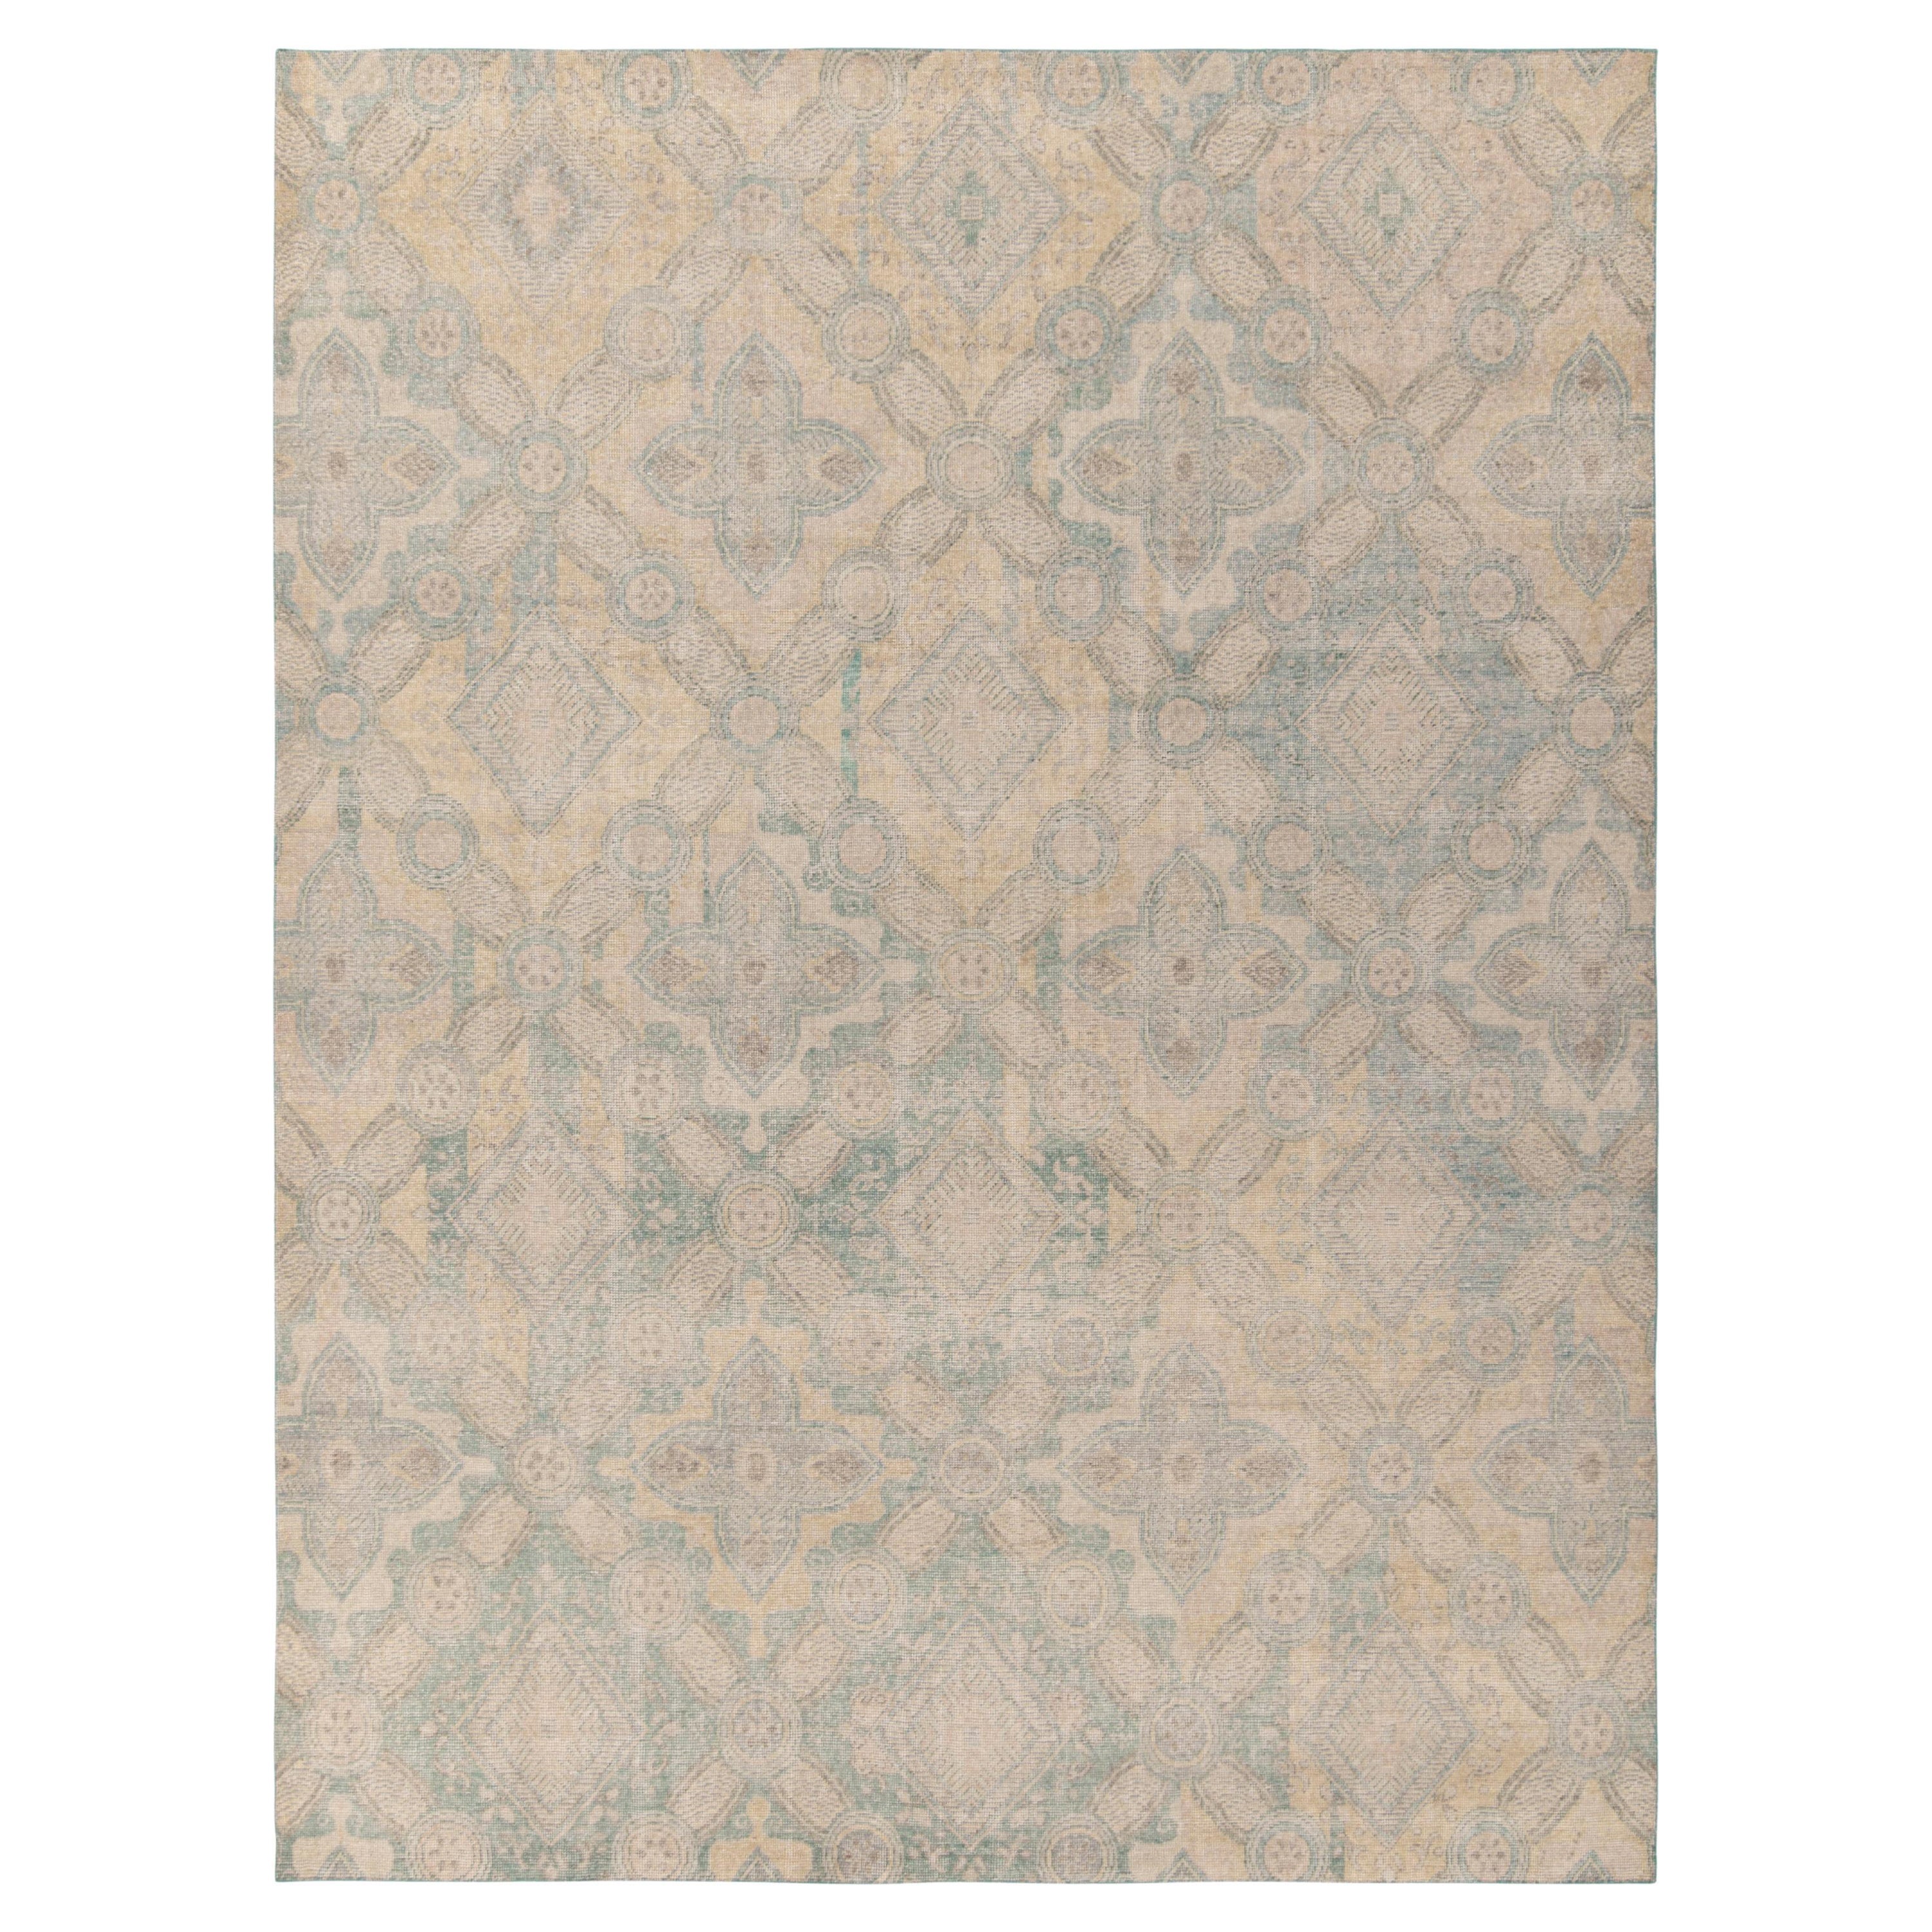 Rug & Kilim's Distressed Transitional Deco Style Rug, Cream, Blue Floral